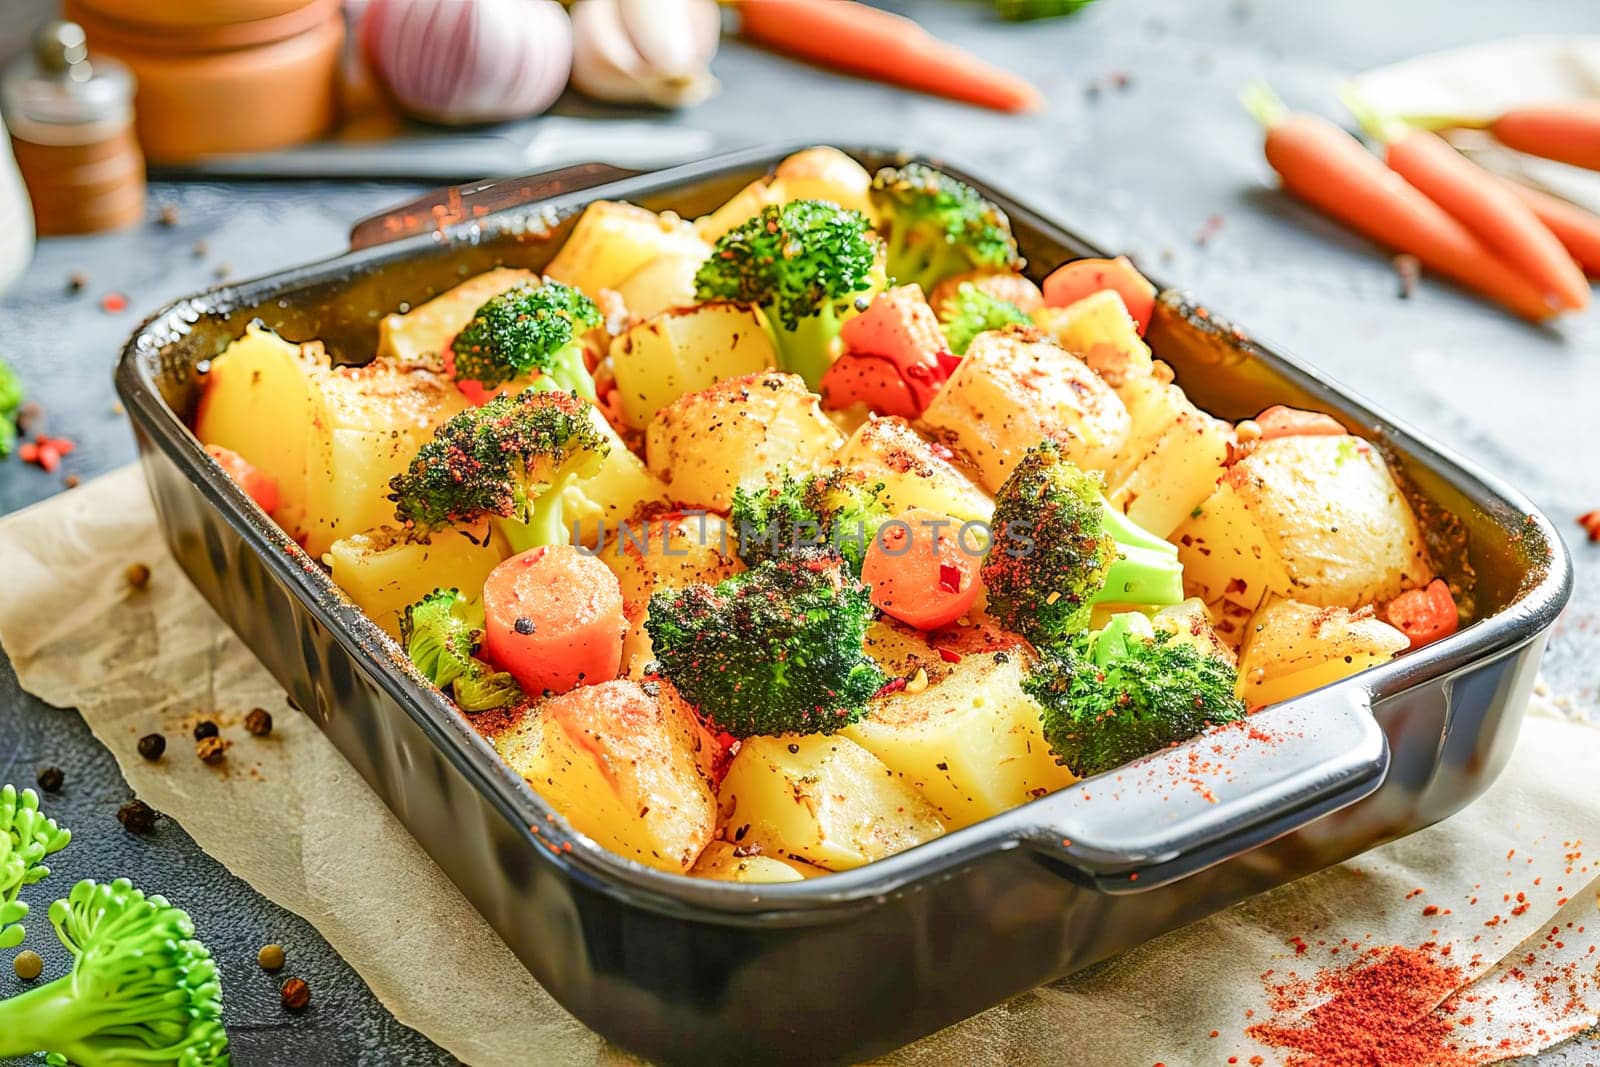 Homemade vegetable casserole of potatoes, carrots and broccoli with spices and cheese in a baking dish, on the table, in the kitchen. Healthy diet.